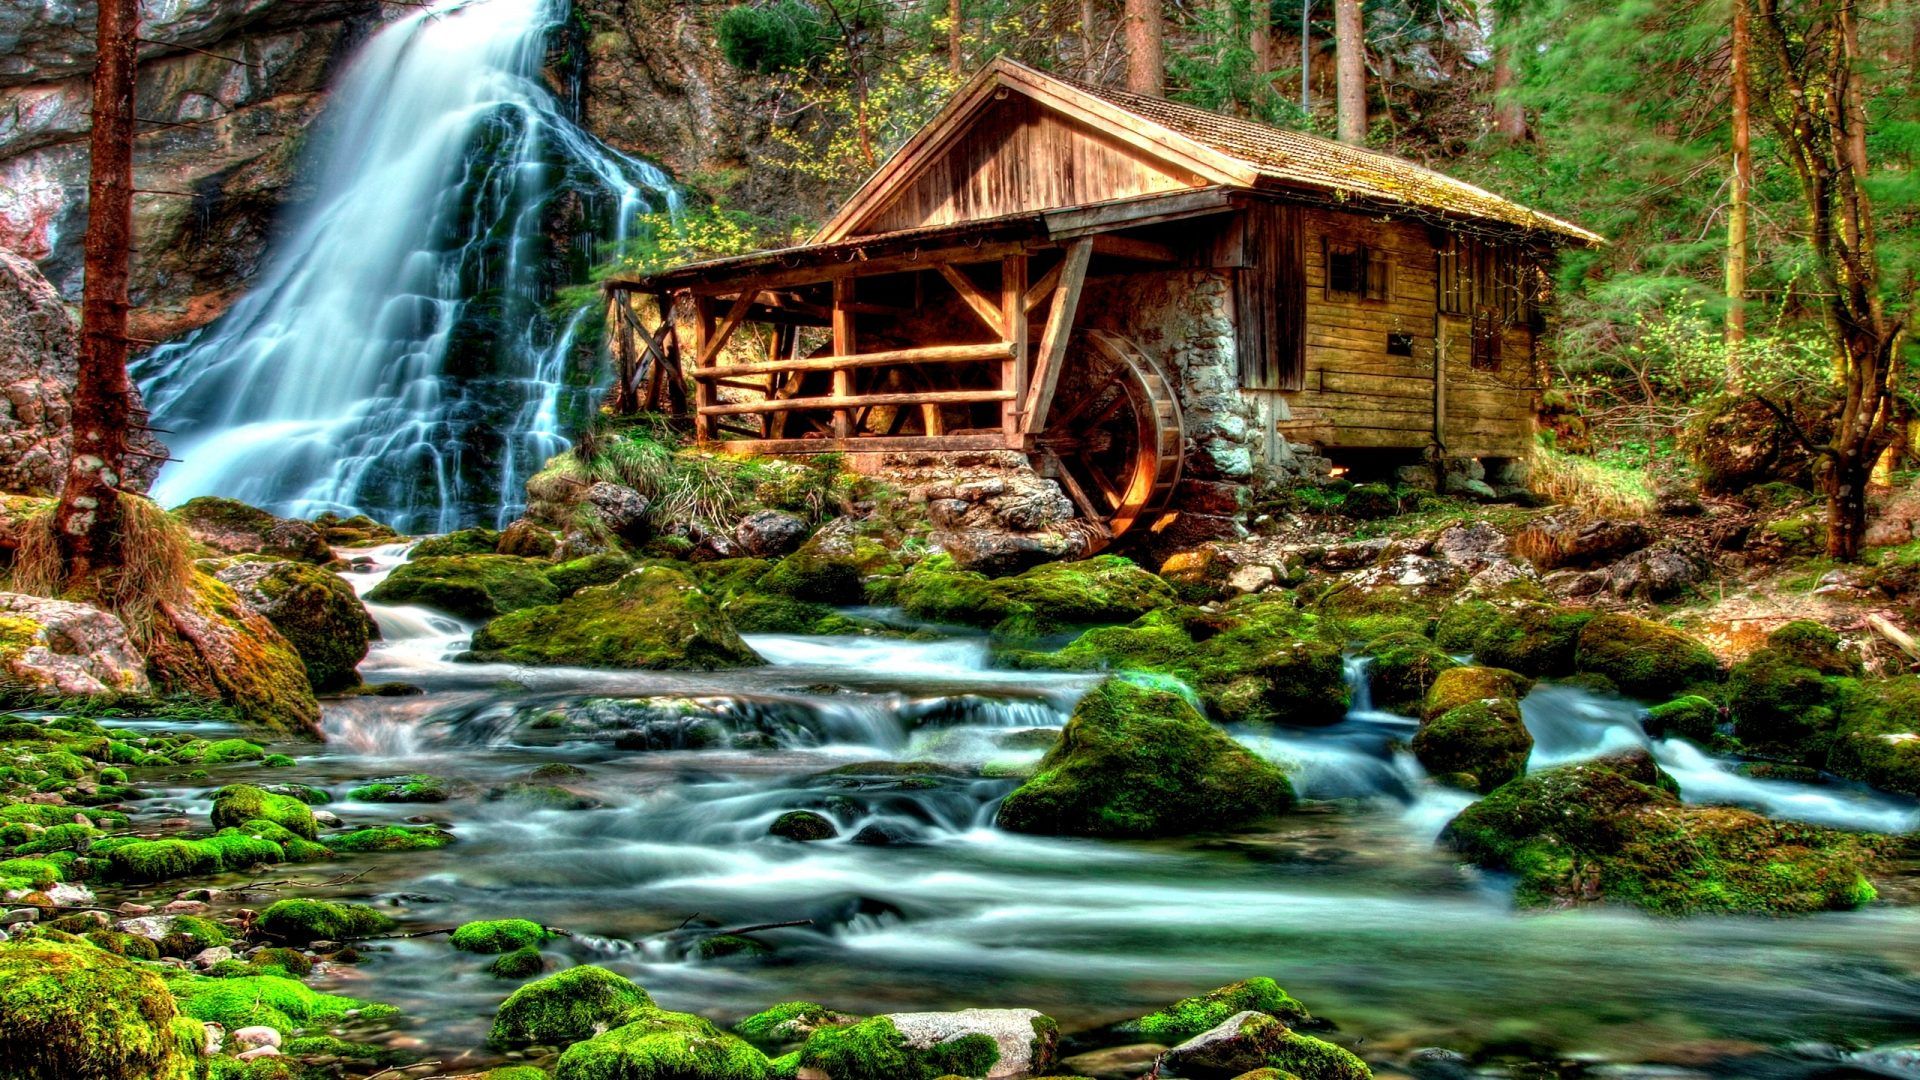 ArchitectureIMG.com FALLS WATERMILL Forest Water Waterfall Wallpaper. Waterfall, Waterfall wallpaper, Water